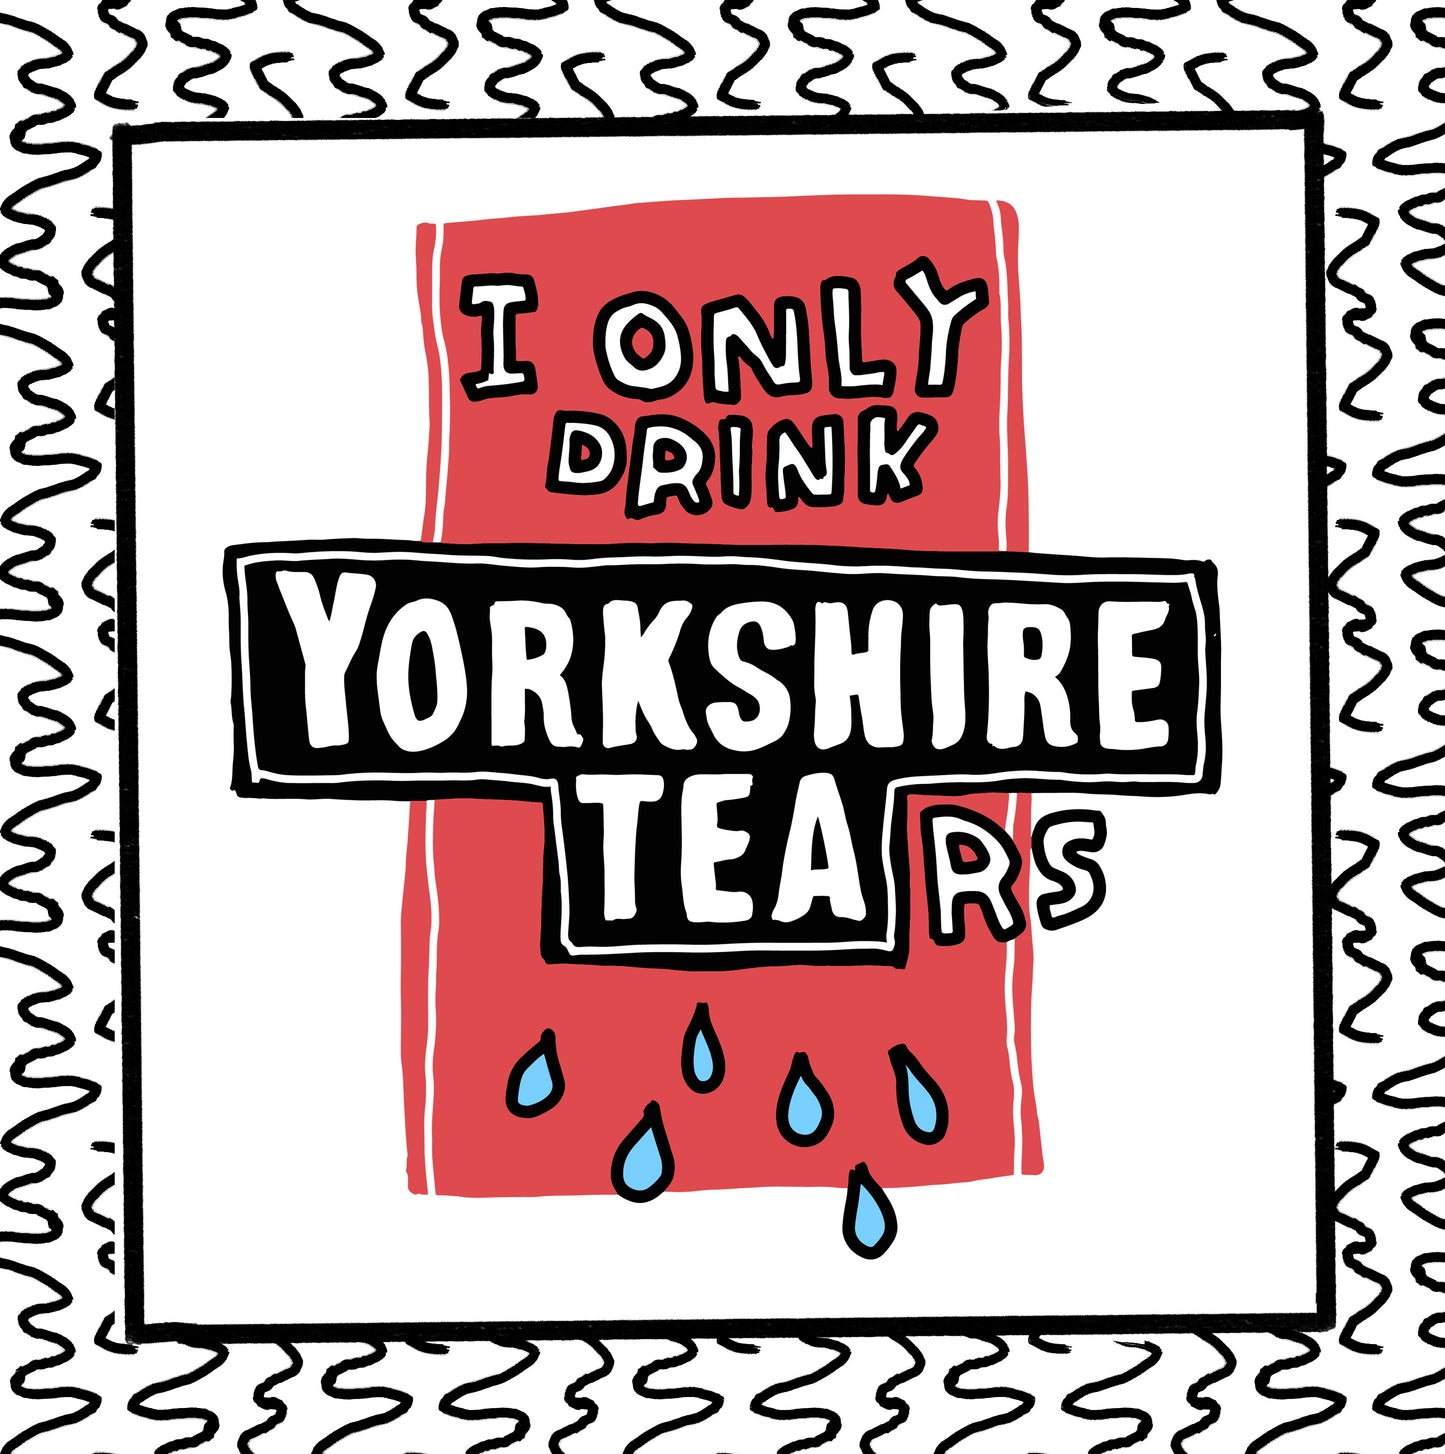 i only drink yorkshire tears